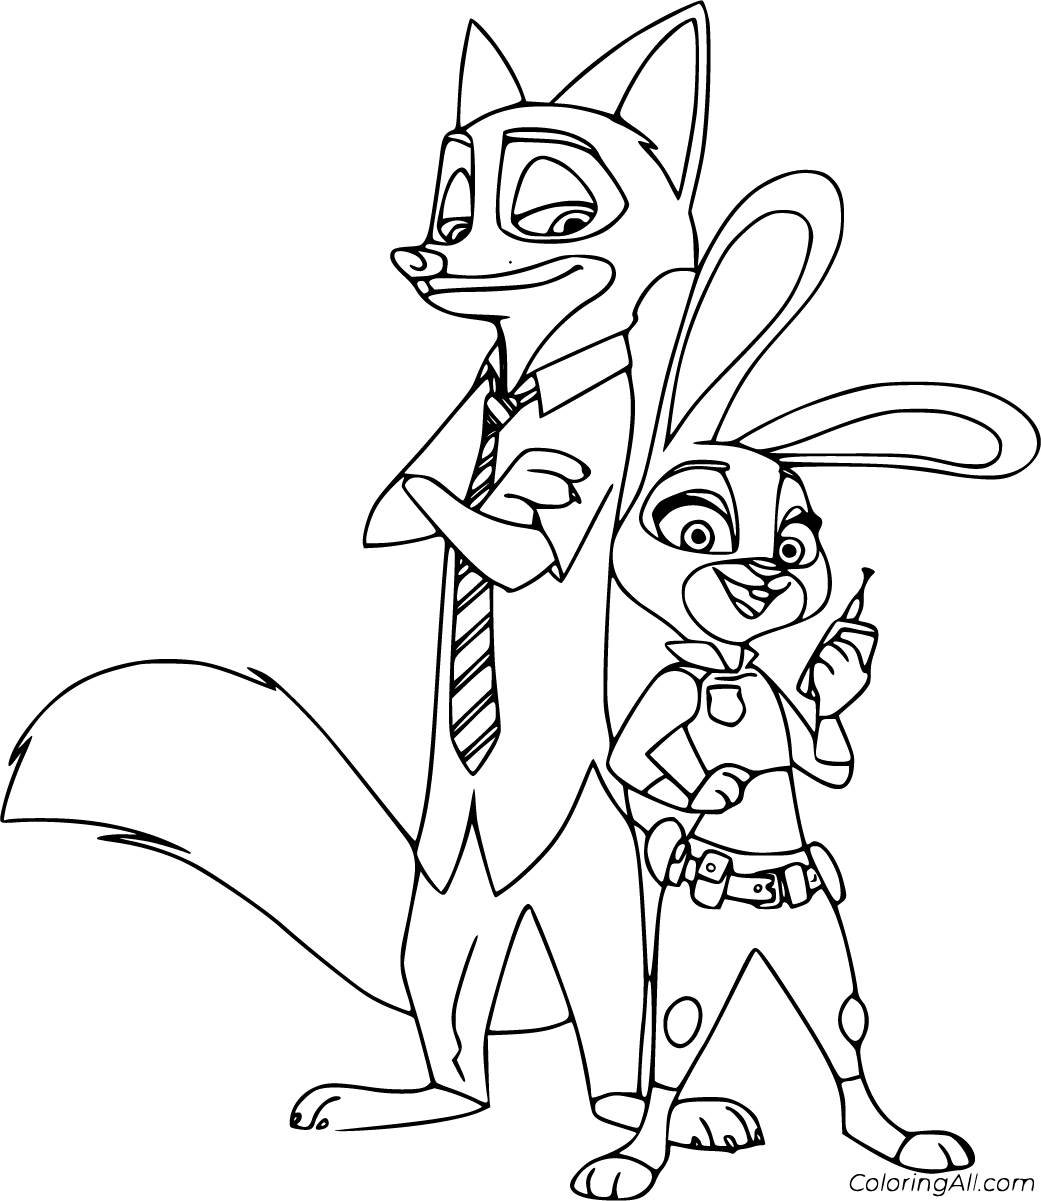 Zootopia Coloring Pages   ColoringAll